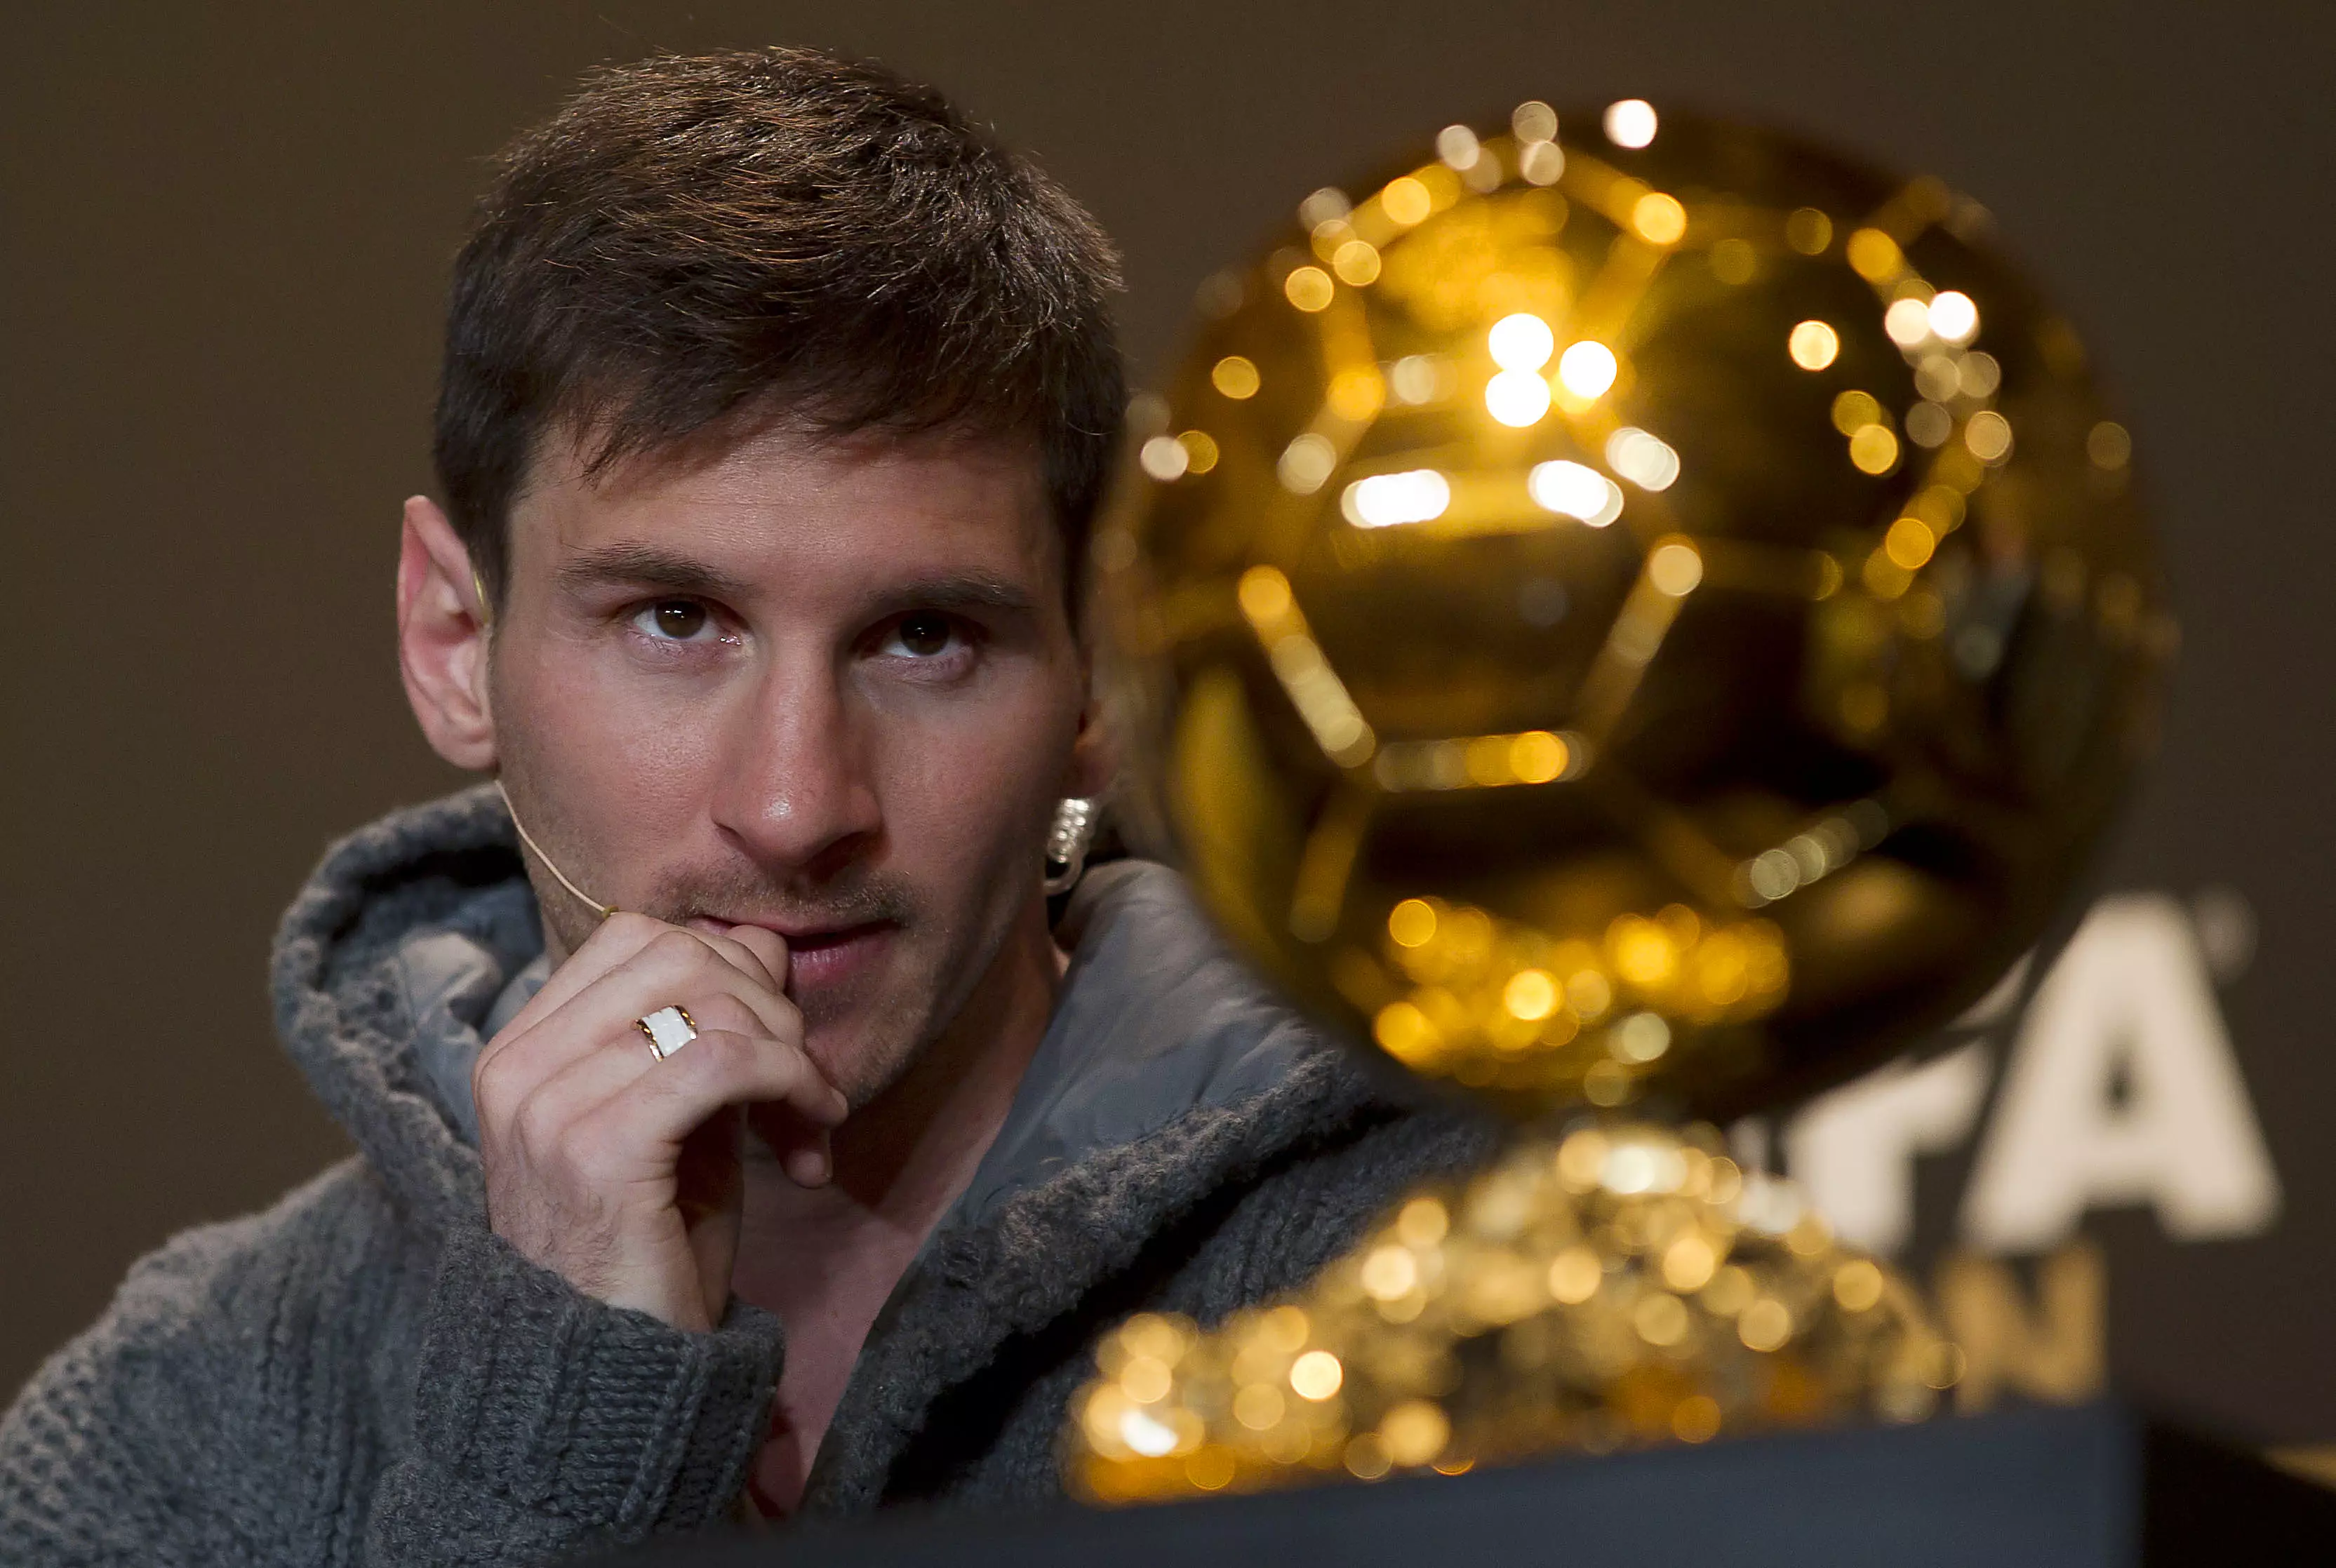 Messi looks lovingly at the award. Image: PA Images